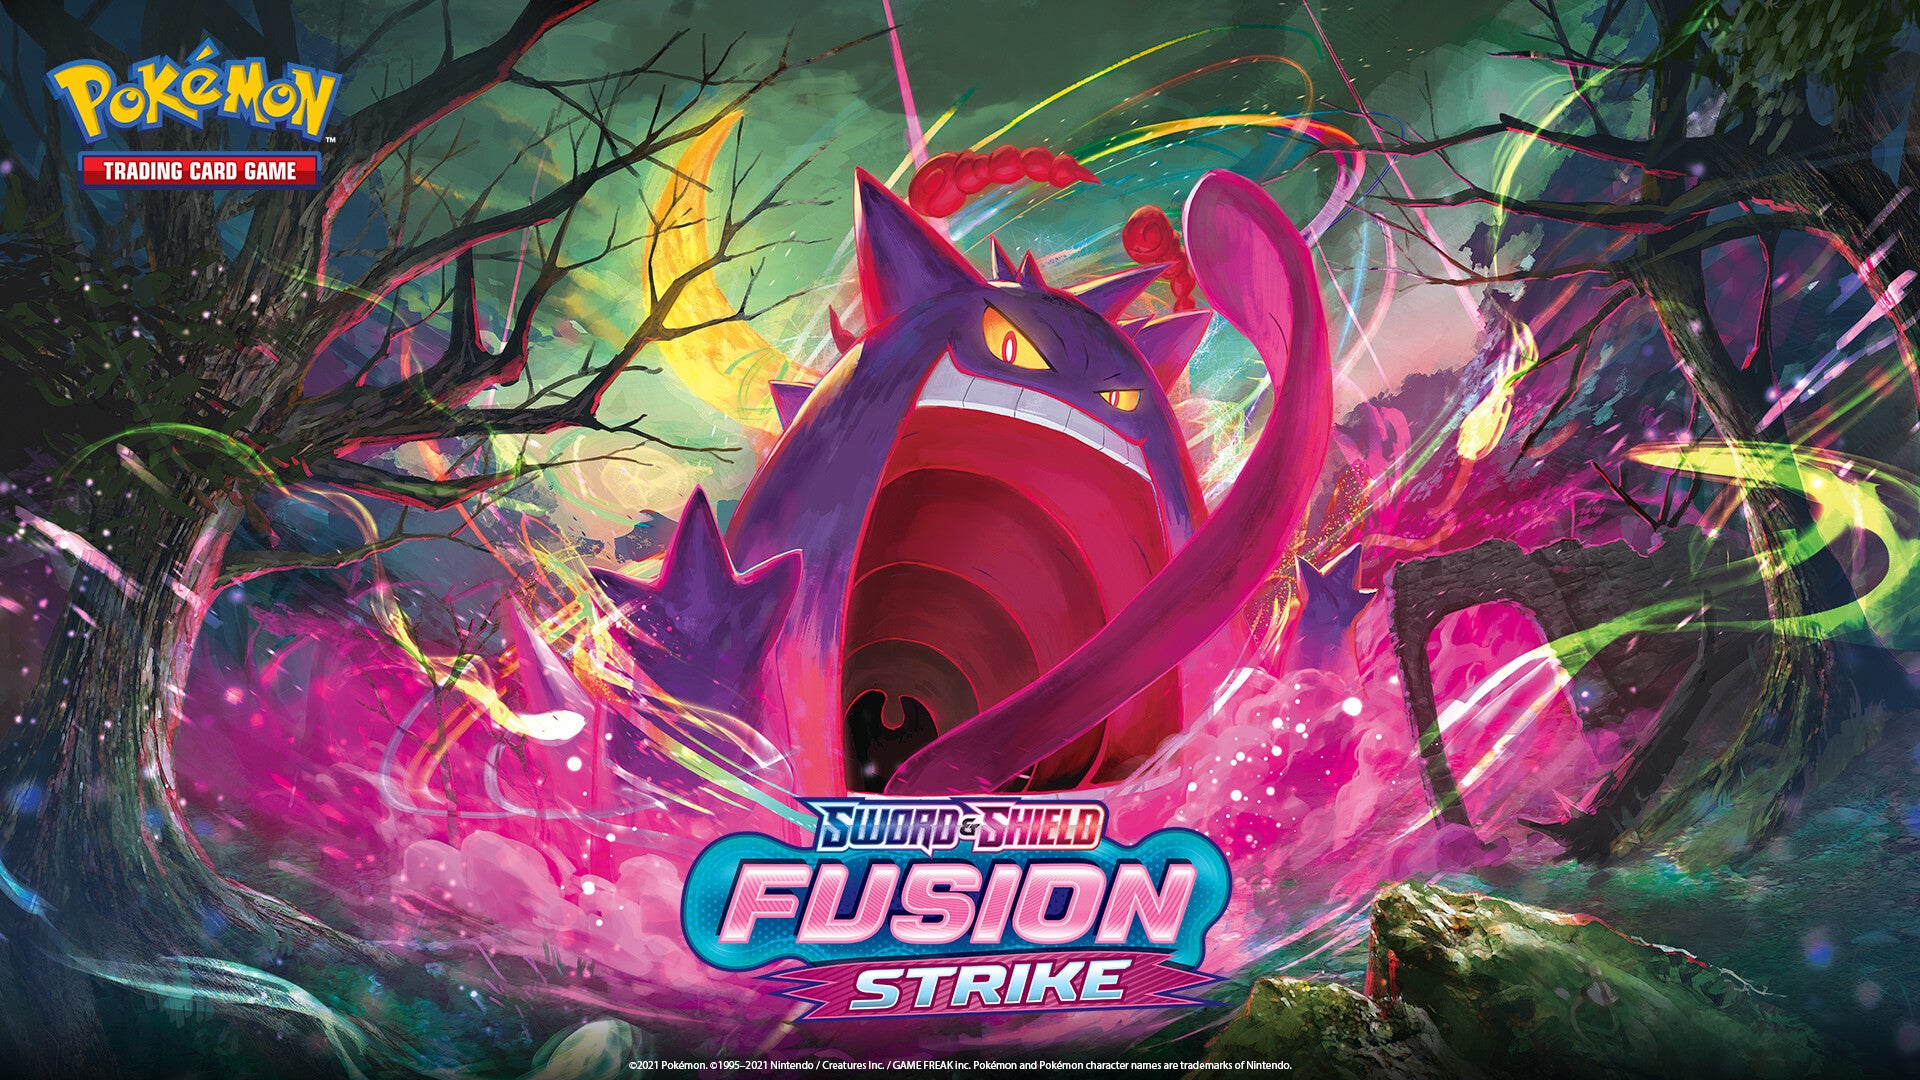 Download Fusion Strike Wallpaper. PokeGuardian. We Bring You the Latest Pokémon TCG News Every Day!